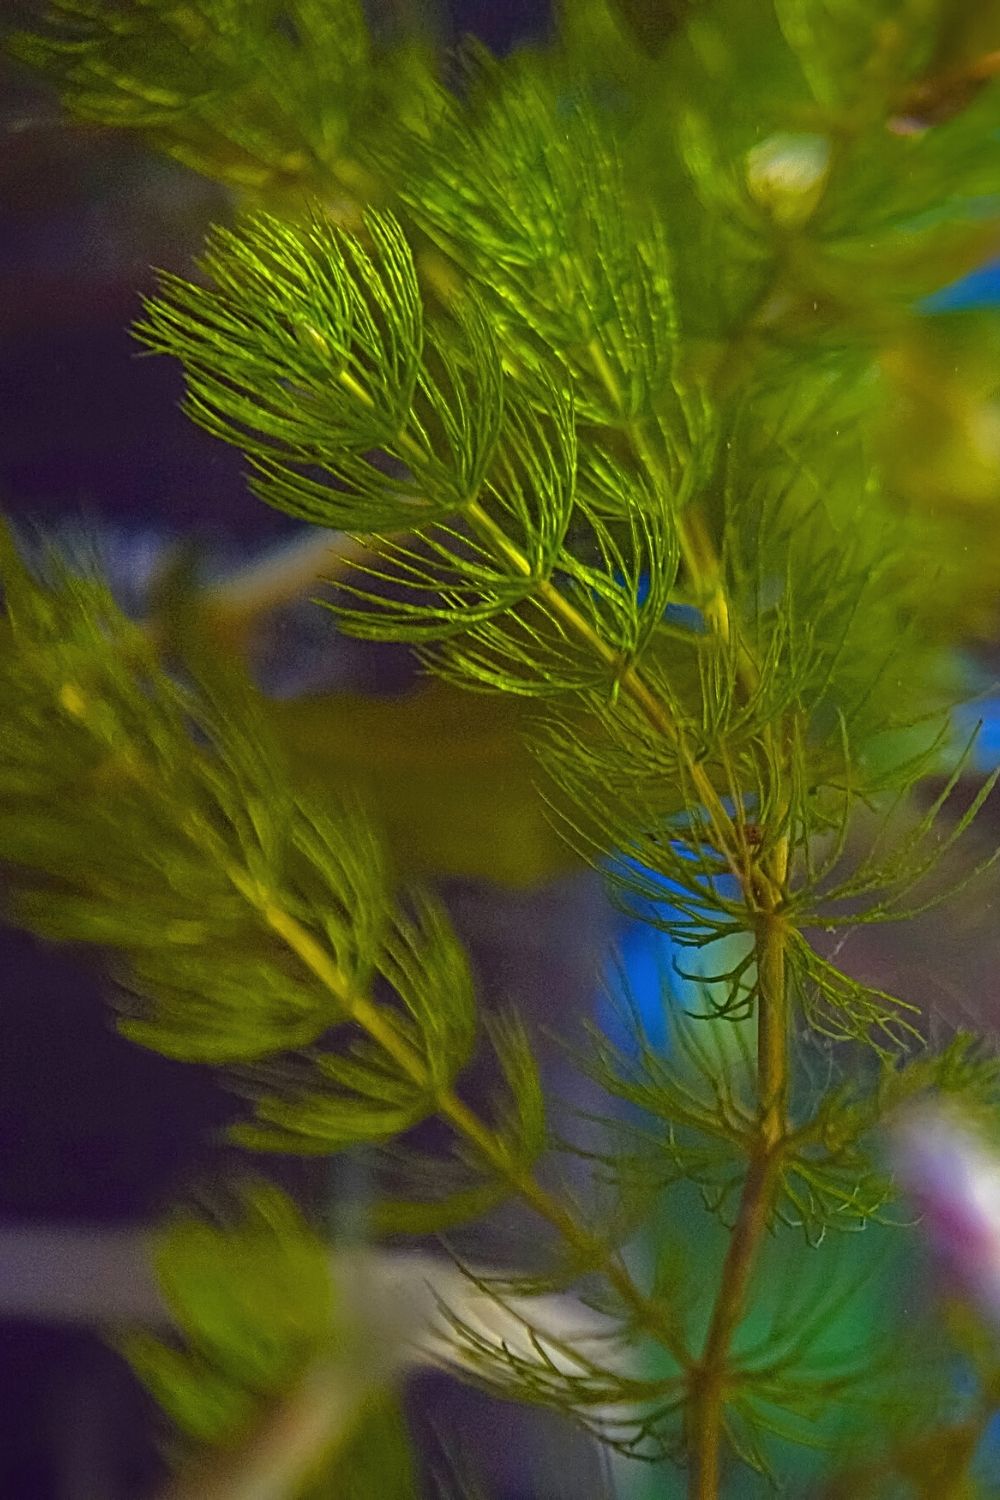 Hornwort is another great plant to grow in your betta fish's tank